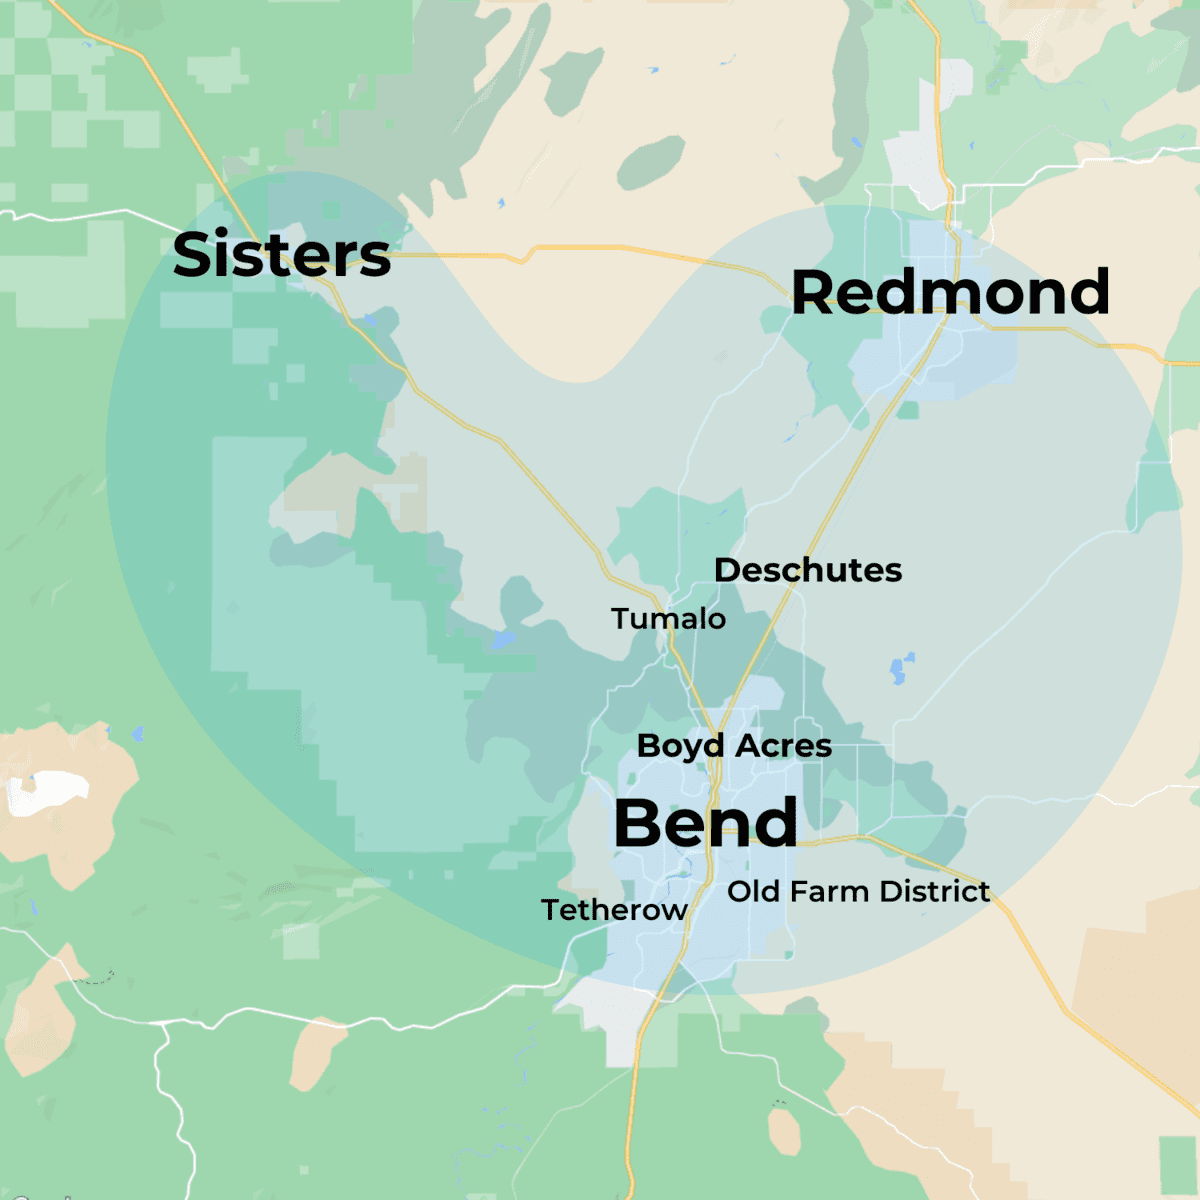 MovementX physical therapy service coverage location map in bend Oregon